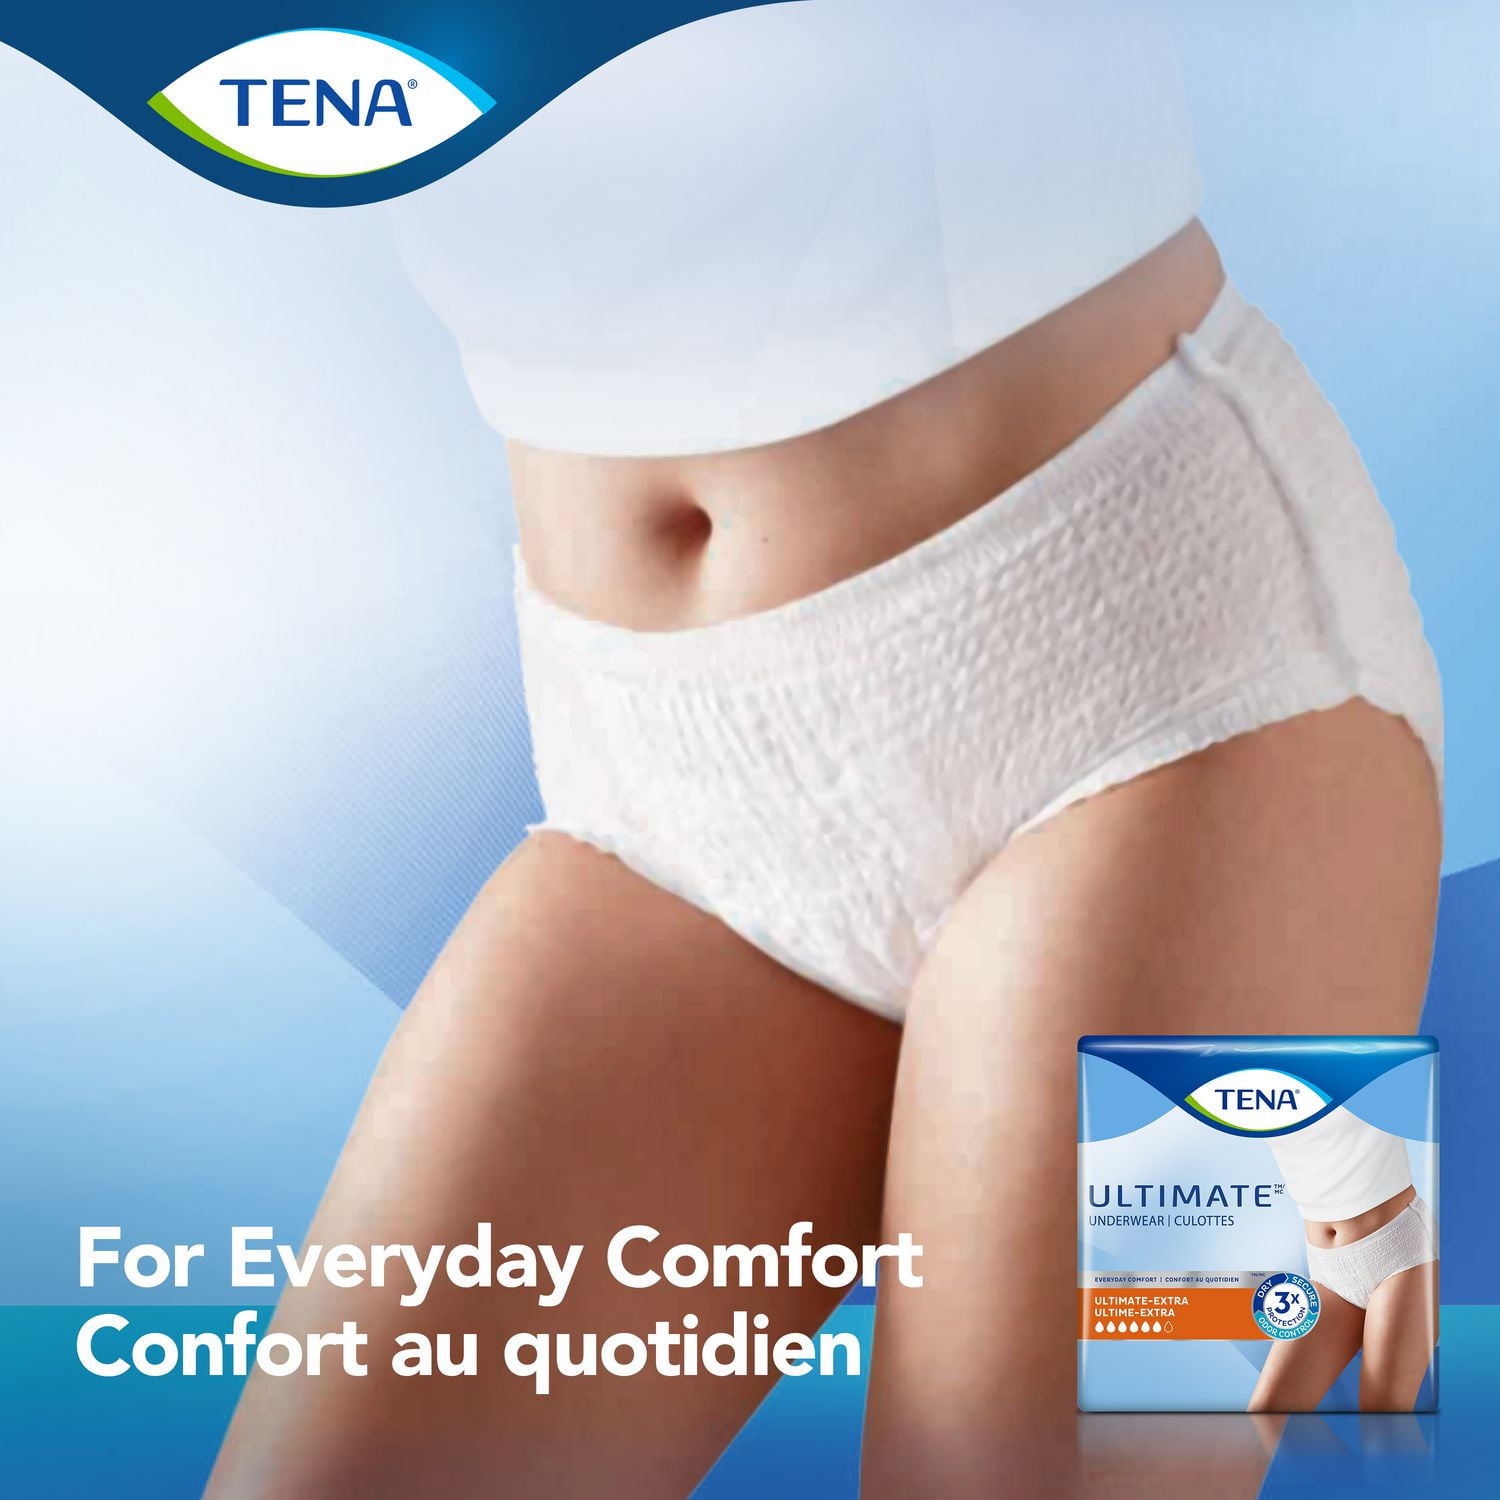 TENA ProSkin Incontinence Underwear for Men, Maximum Absorbency, XLarge, 14  Count